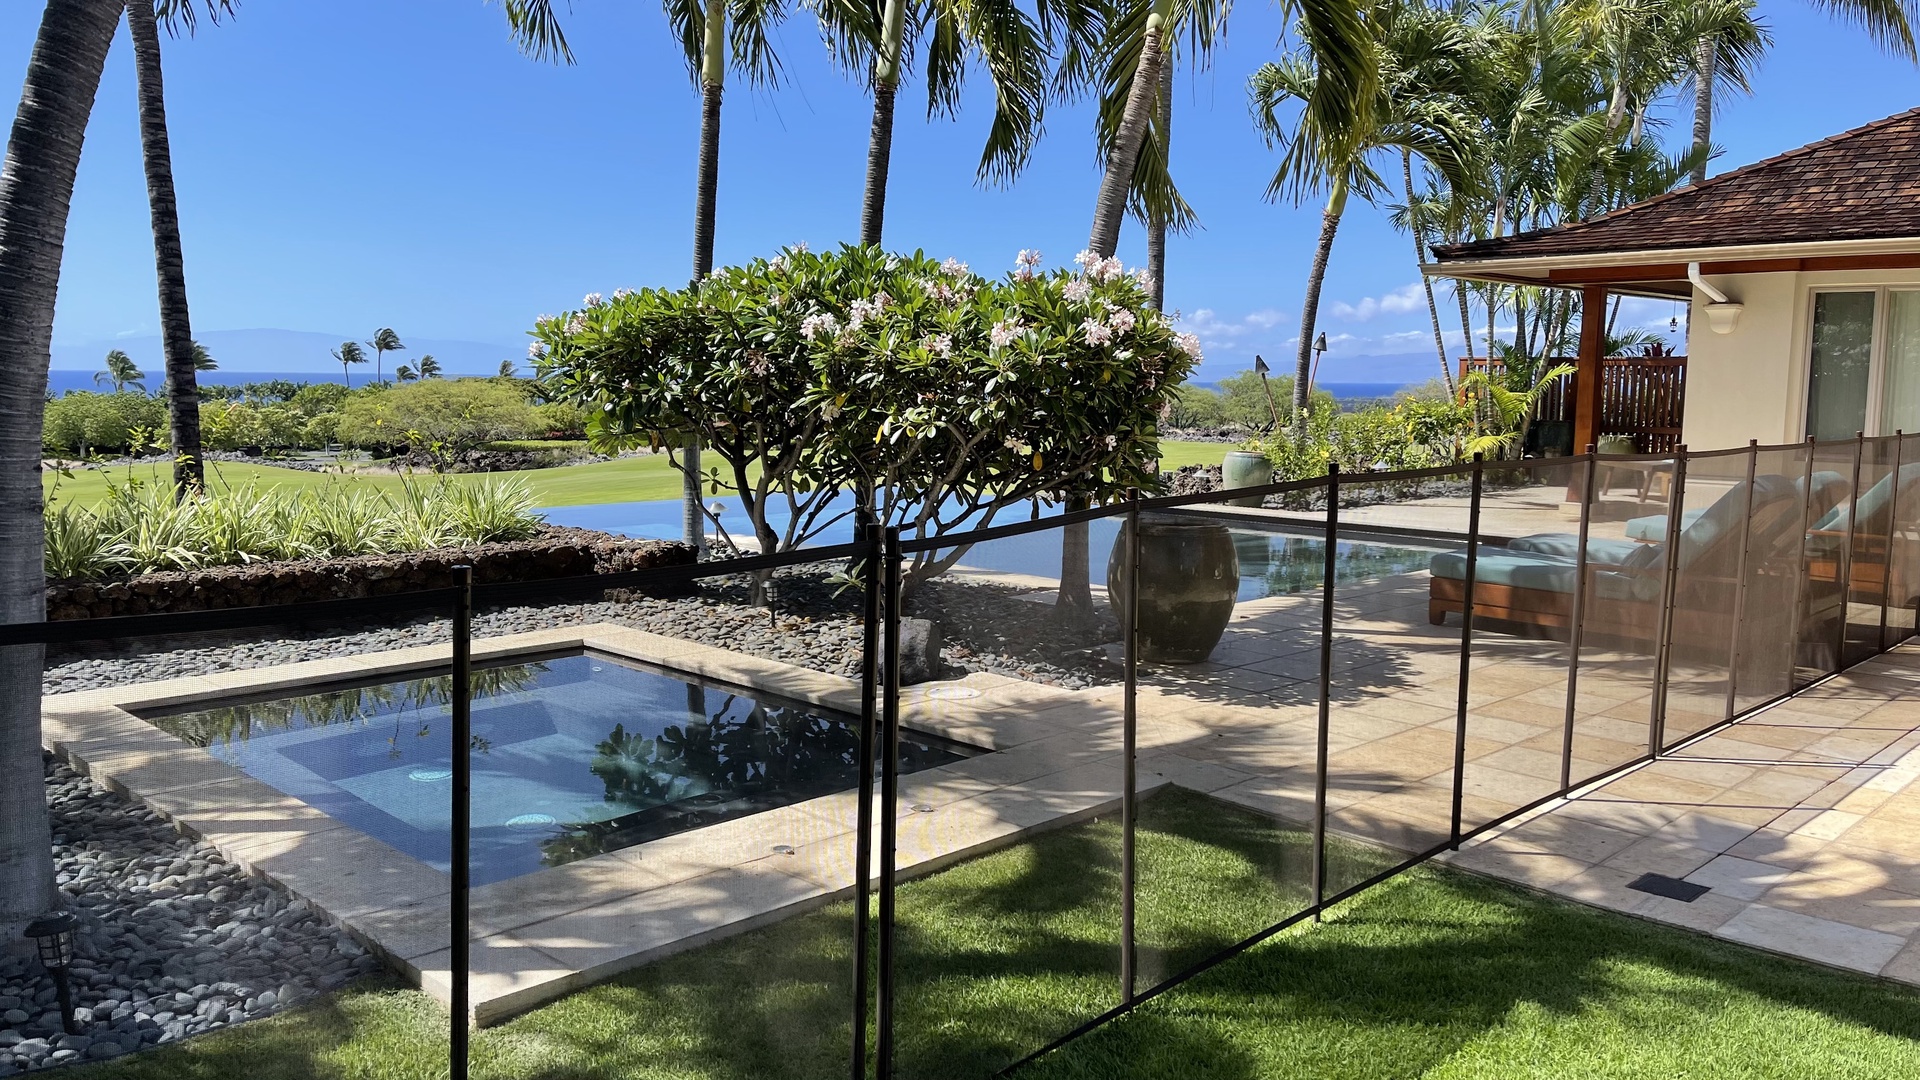 Kailua Kona Vacation Rentals, 4BD Hainoa Estate (102) at Four Seasons Resort at Hualalai - View of Pool w/Child Safety Fence that can be Set-up Upon Request (Set-Up Fee Applies).